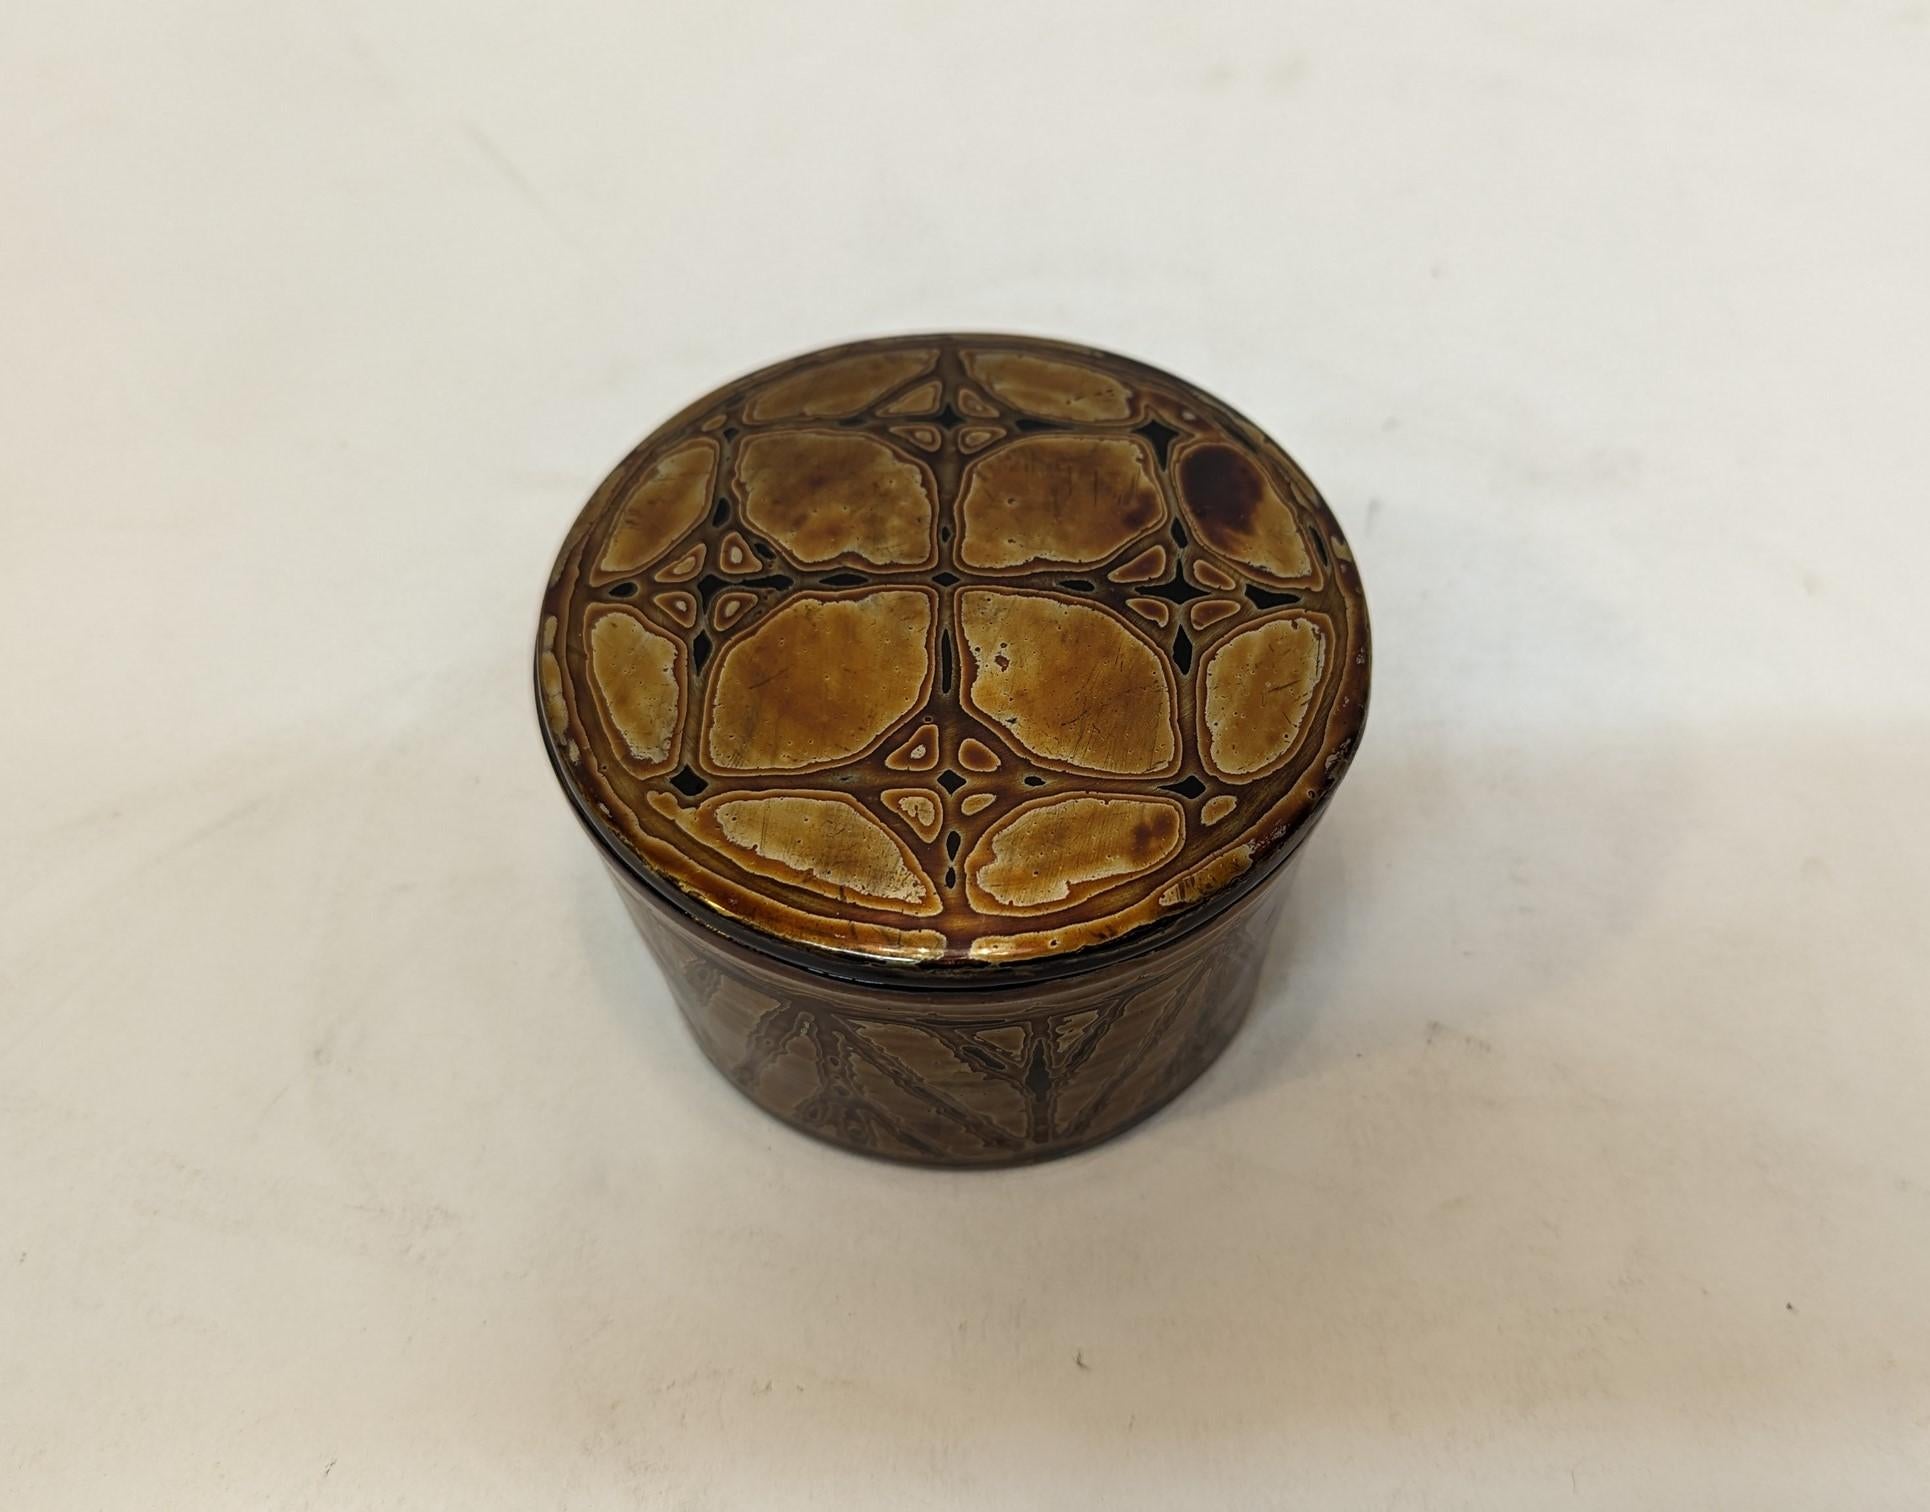 Burmese Lacquer box.  Round Burmese Vintage Lacquer Box. 
Special lacquering technique to make the color and design on this lacquer piece. Unlike most Burmese Lacquerware this is not etched design. The design is achieved through layering of the